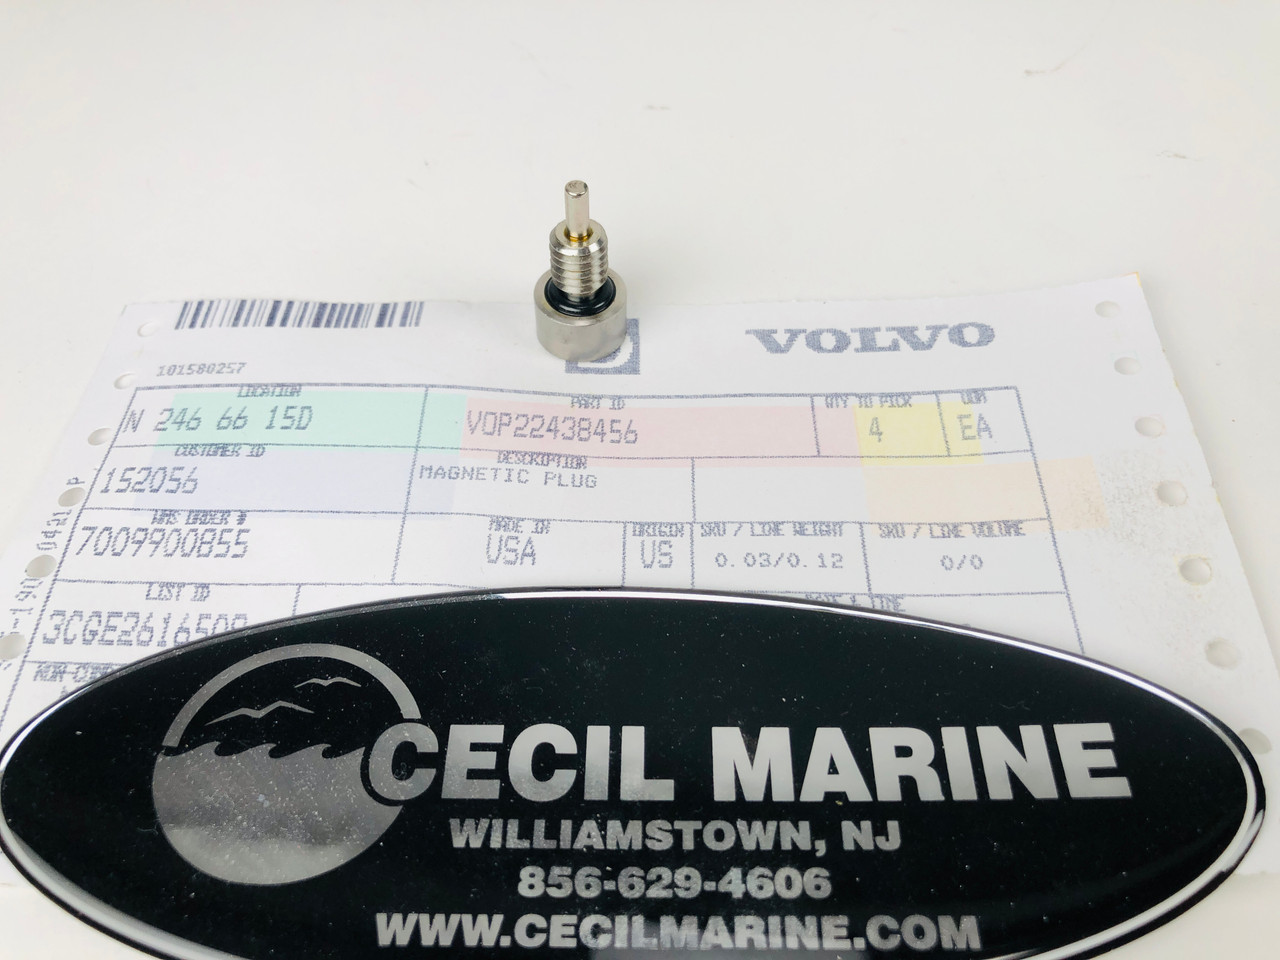 $29.99* GENUINE VOLVO no tax* MAGNETIC PLUG 22438456 *In Stock & Ready To Ship!